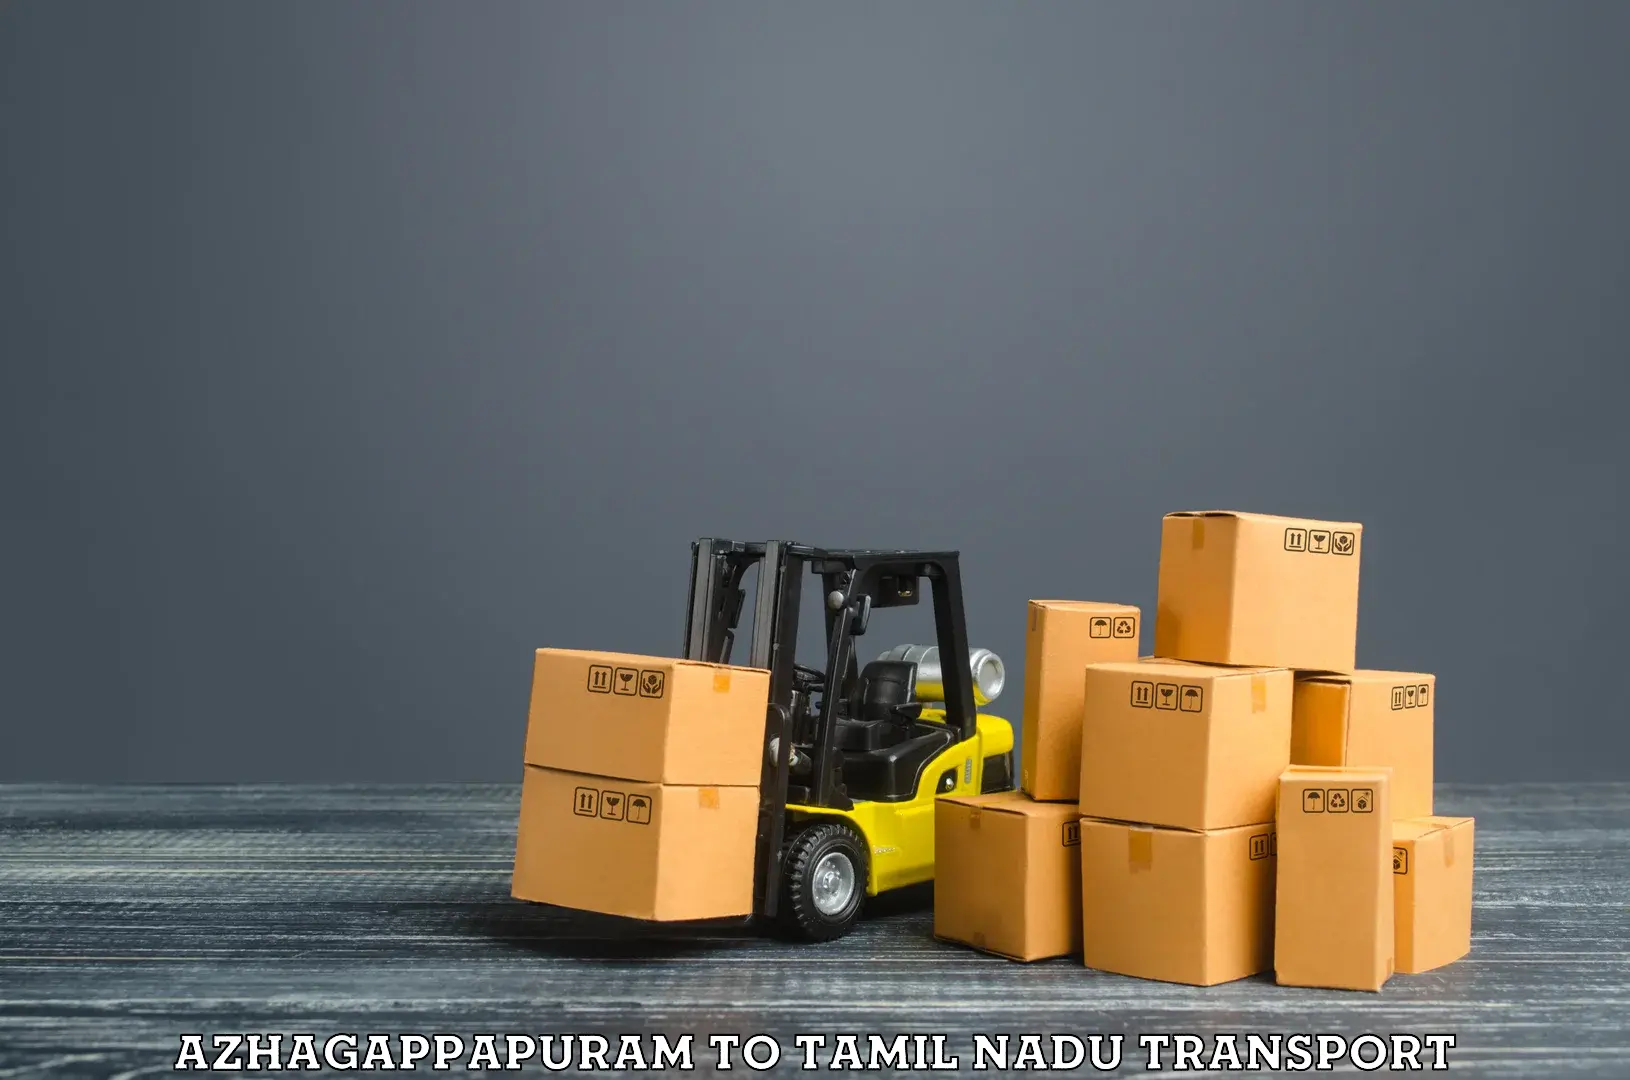 Package delivery services Azhagappapuram to Ayyampettai